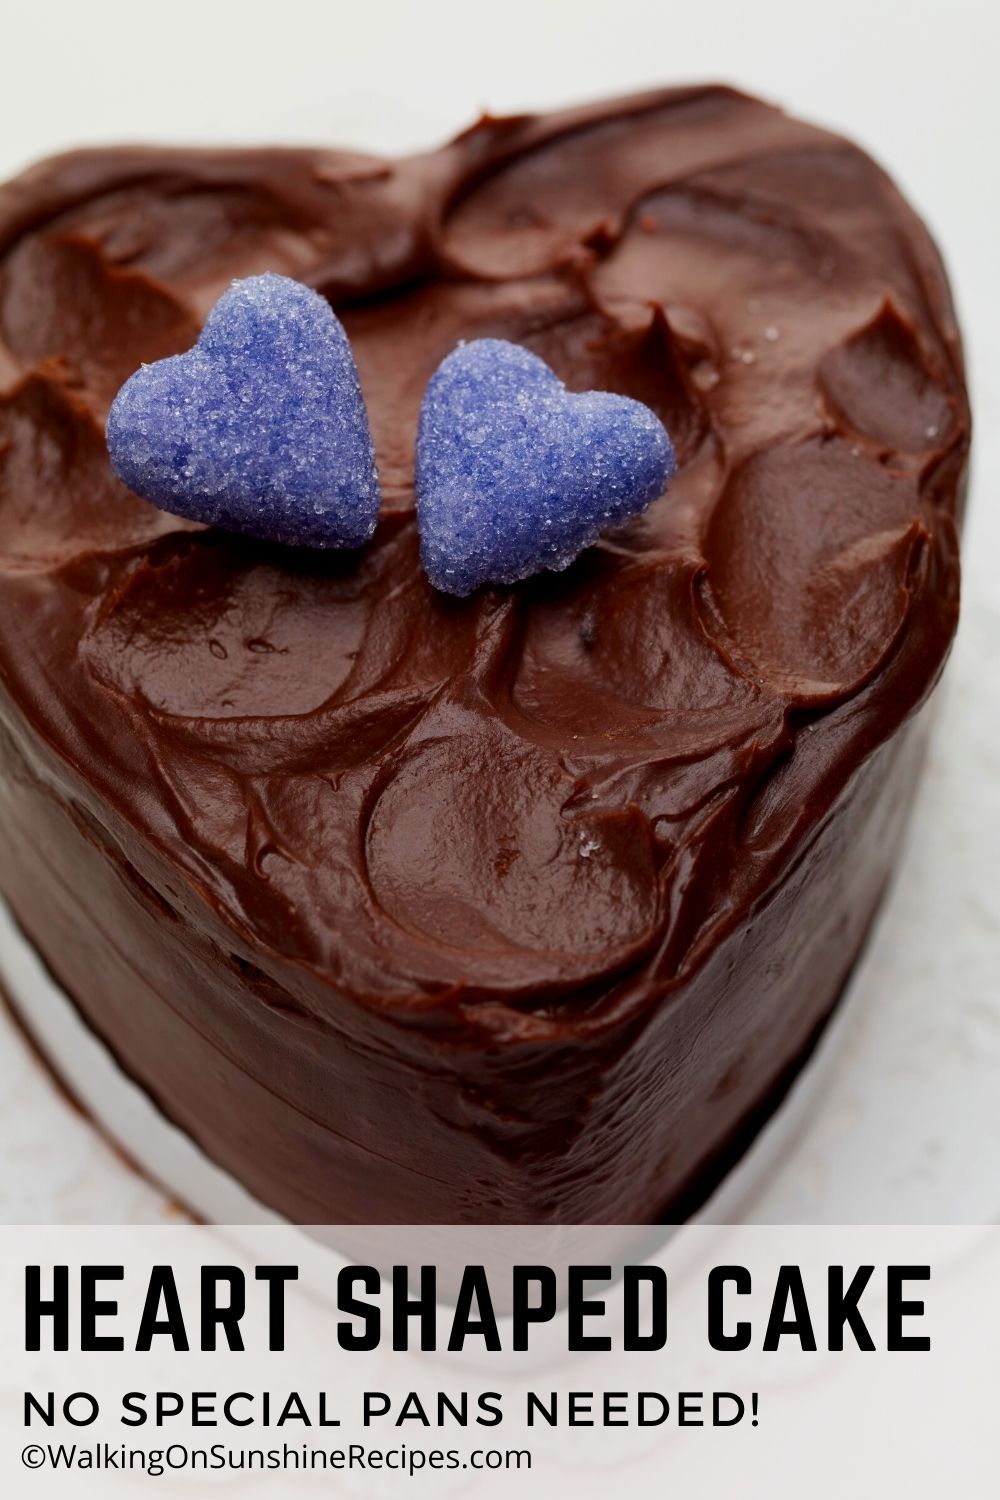 no heart shaped cake pan needed to make this cake for Valentine's Day